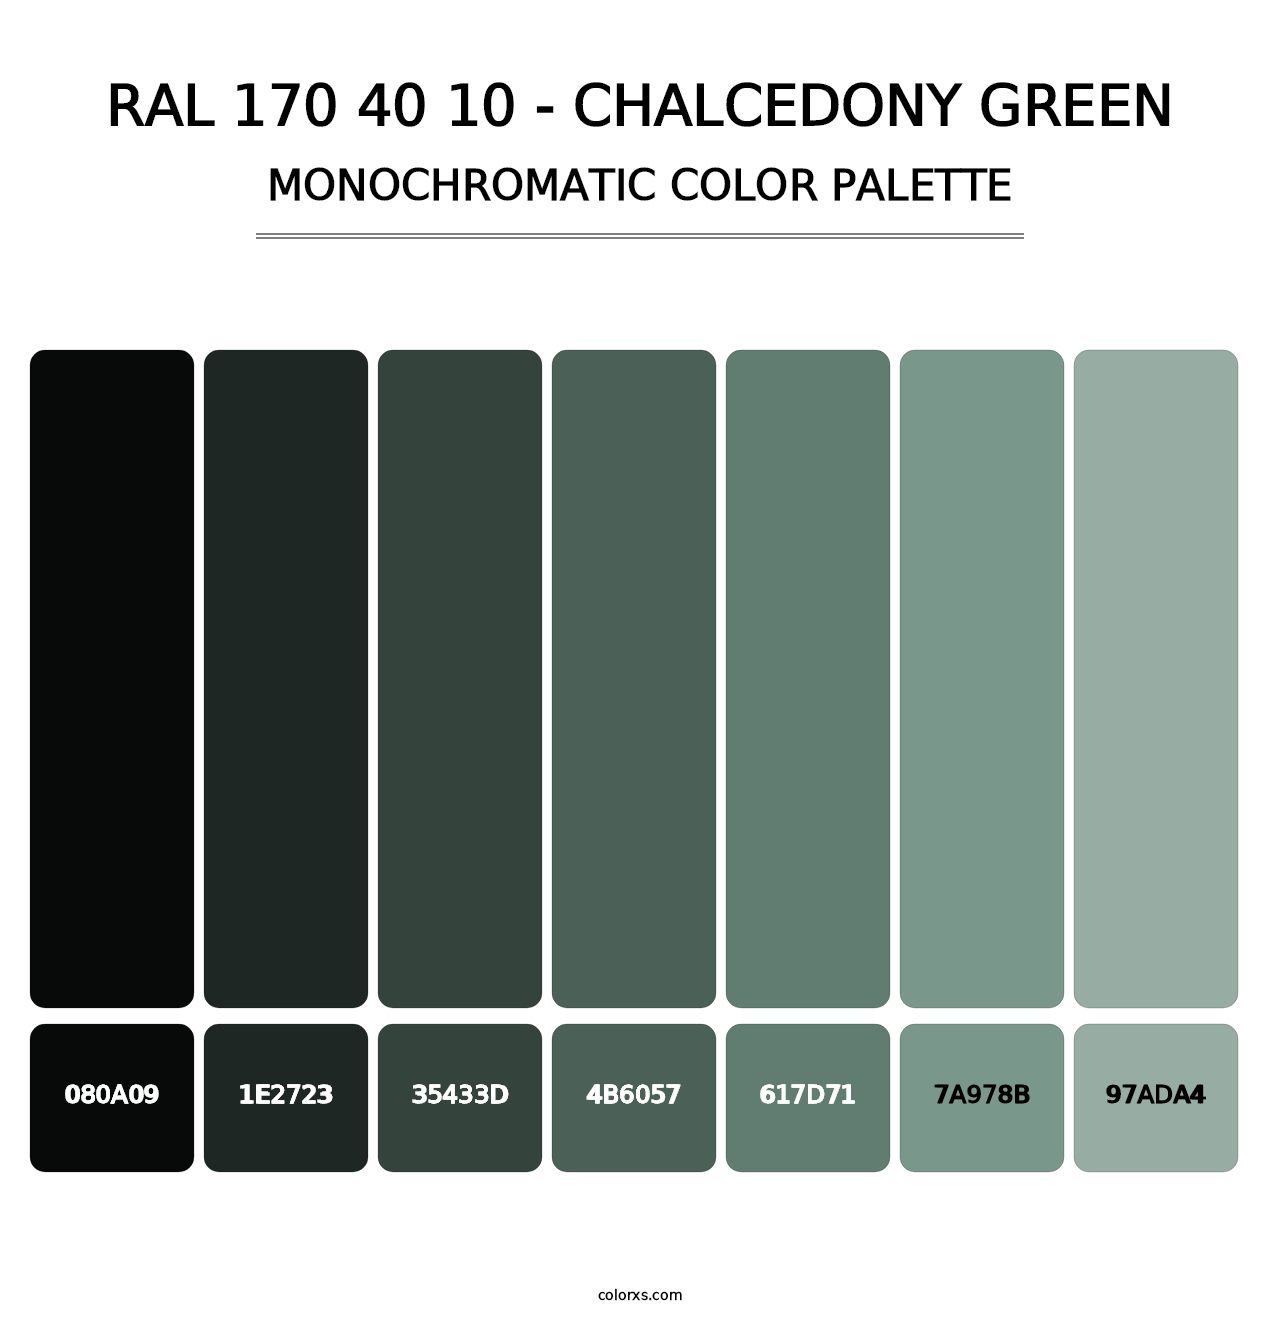 RAL 170 40 10 - Chalcedony Green - Monochromatic Color Palette